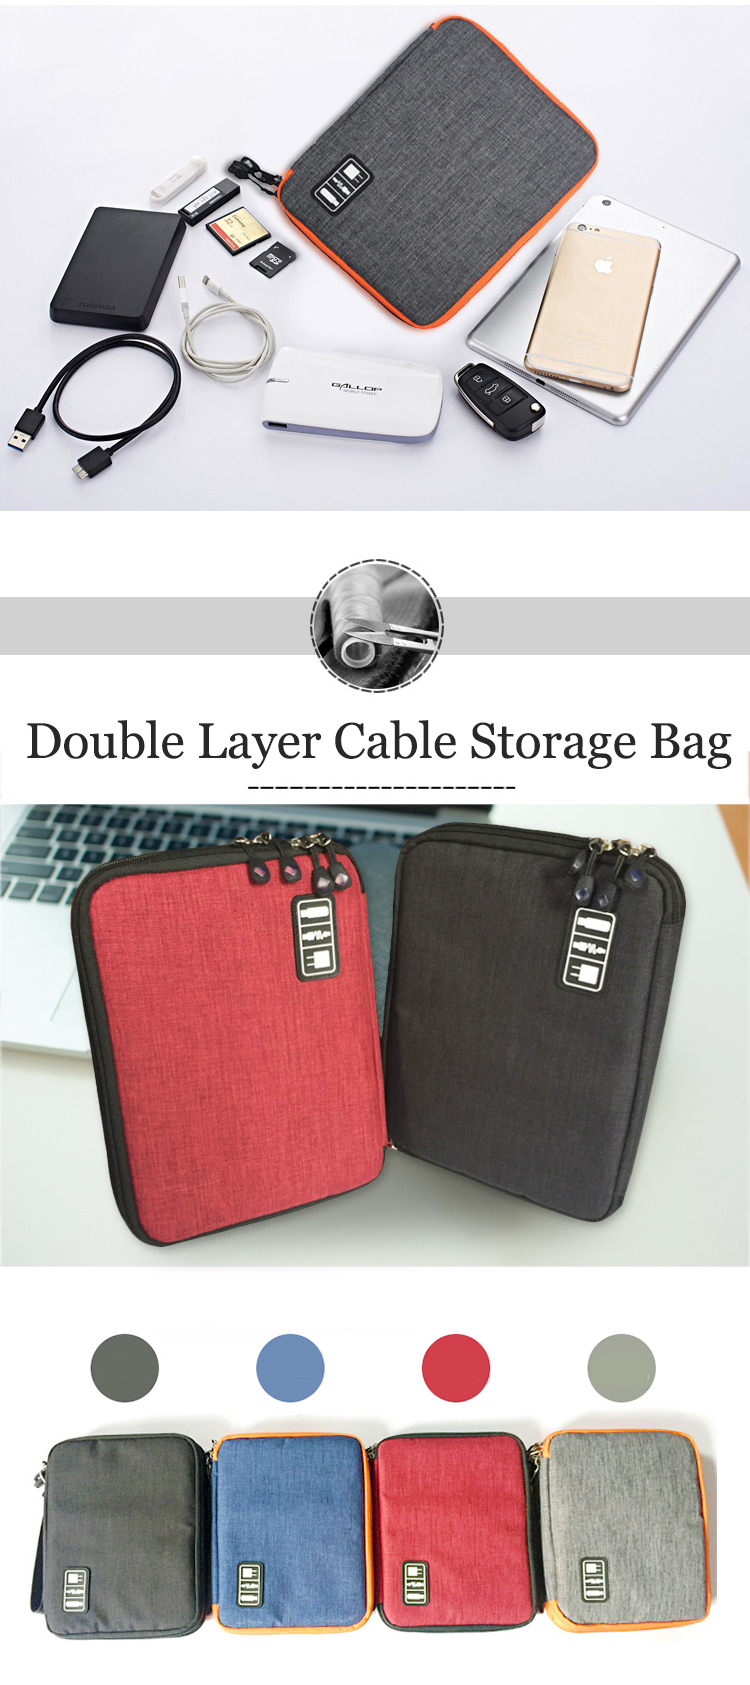 Honana-HN-CB1-Double-Layer-Cable-Storage-Bag-Electronic-Accessories-Organizer-Travel-Gear-1127676-1